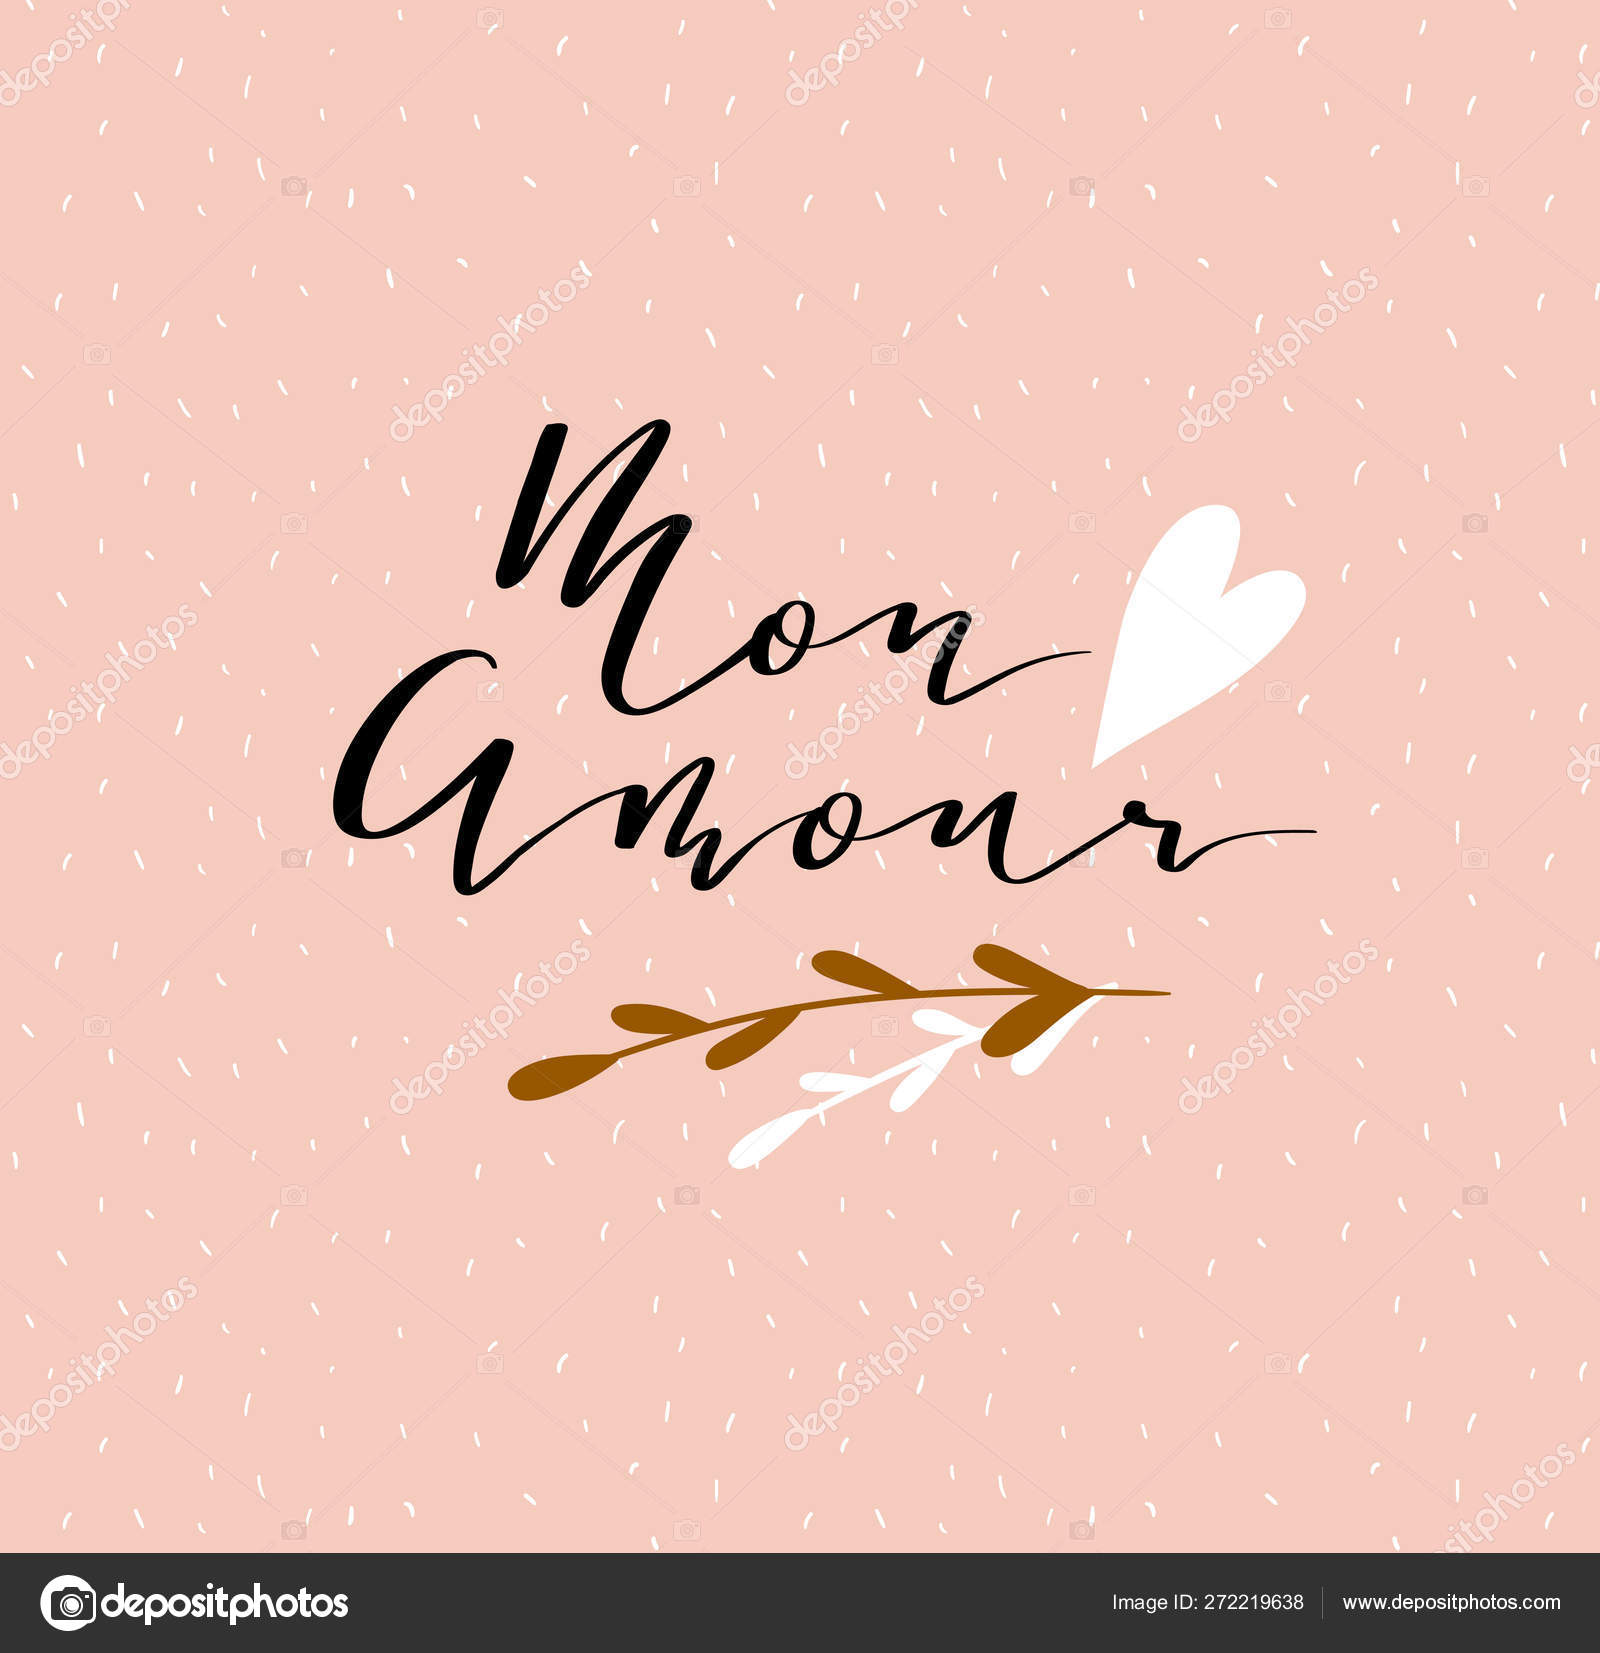 Mon amour valentines day card Royalty Free Vector Image